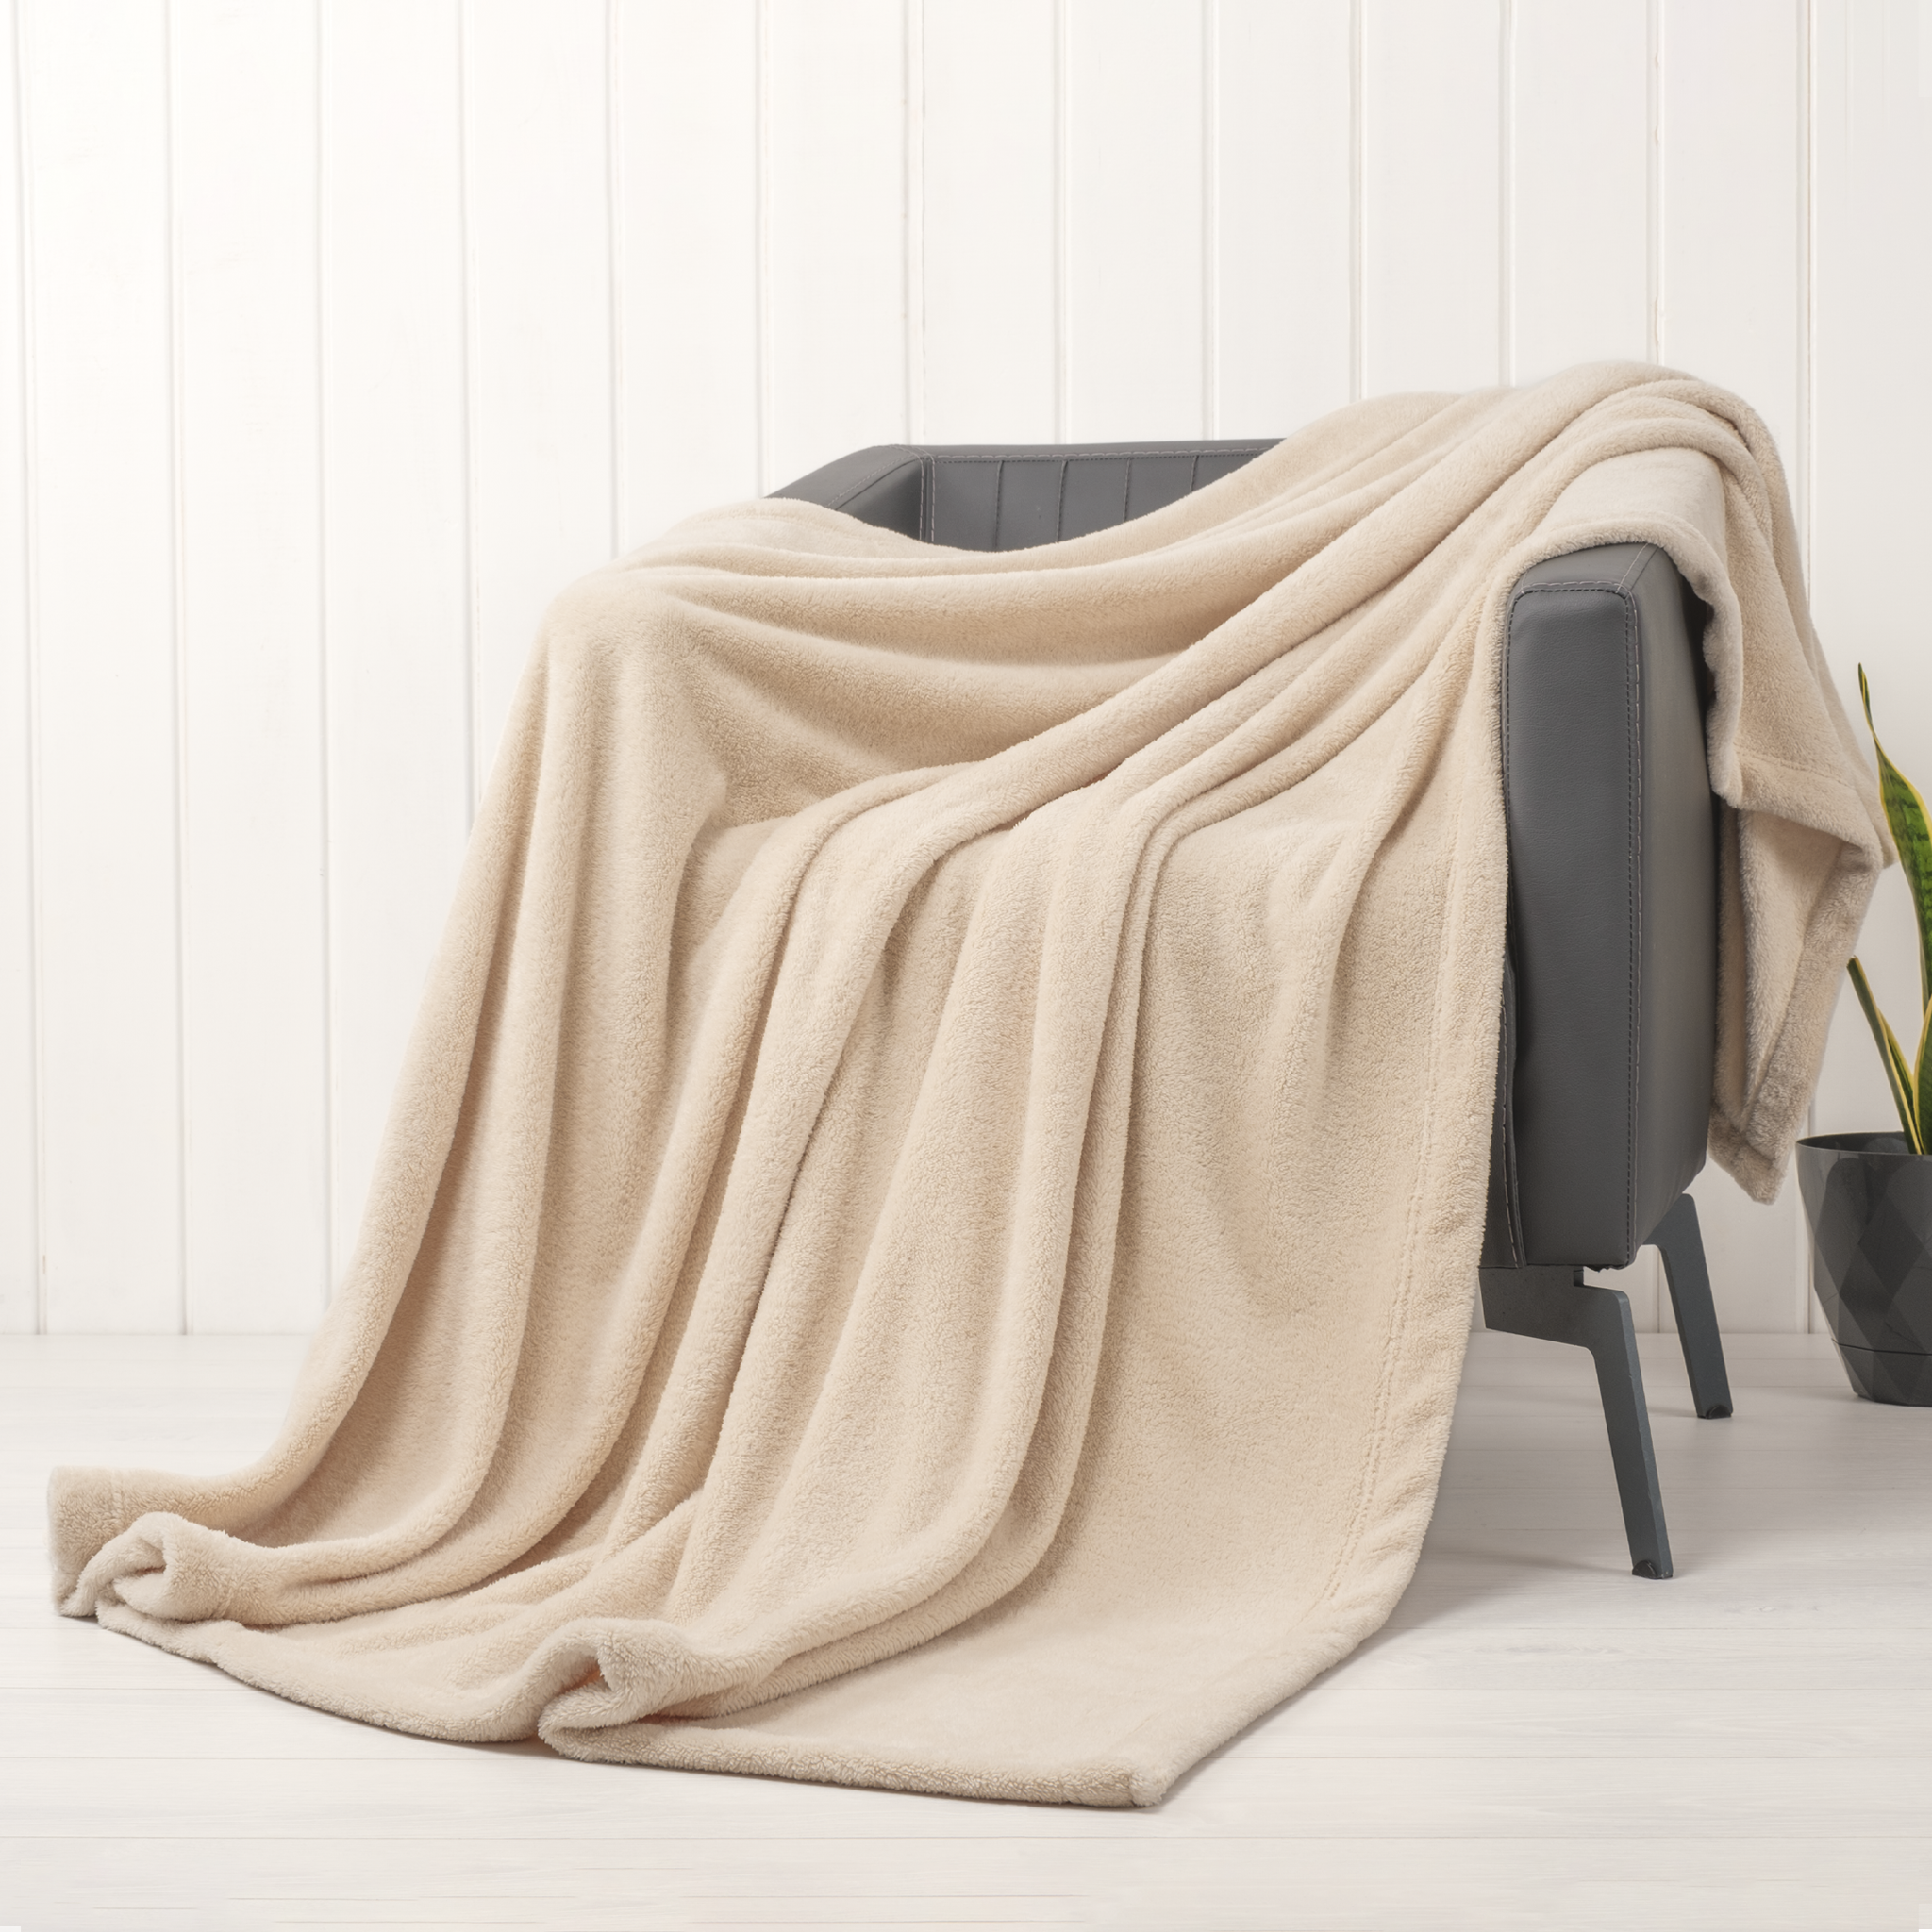 American Soft Linen - Bedding Fleece Blanket - Twin Size 60x80 inches - Sand-Taupe - 1